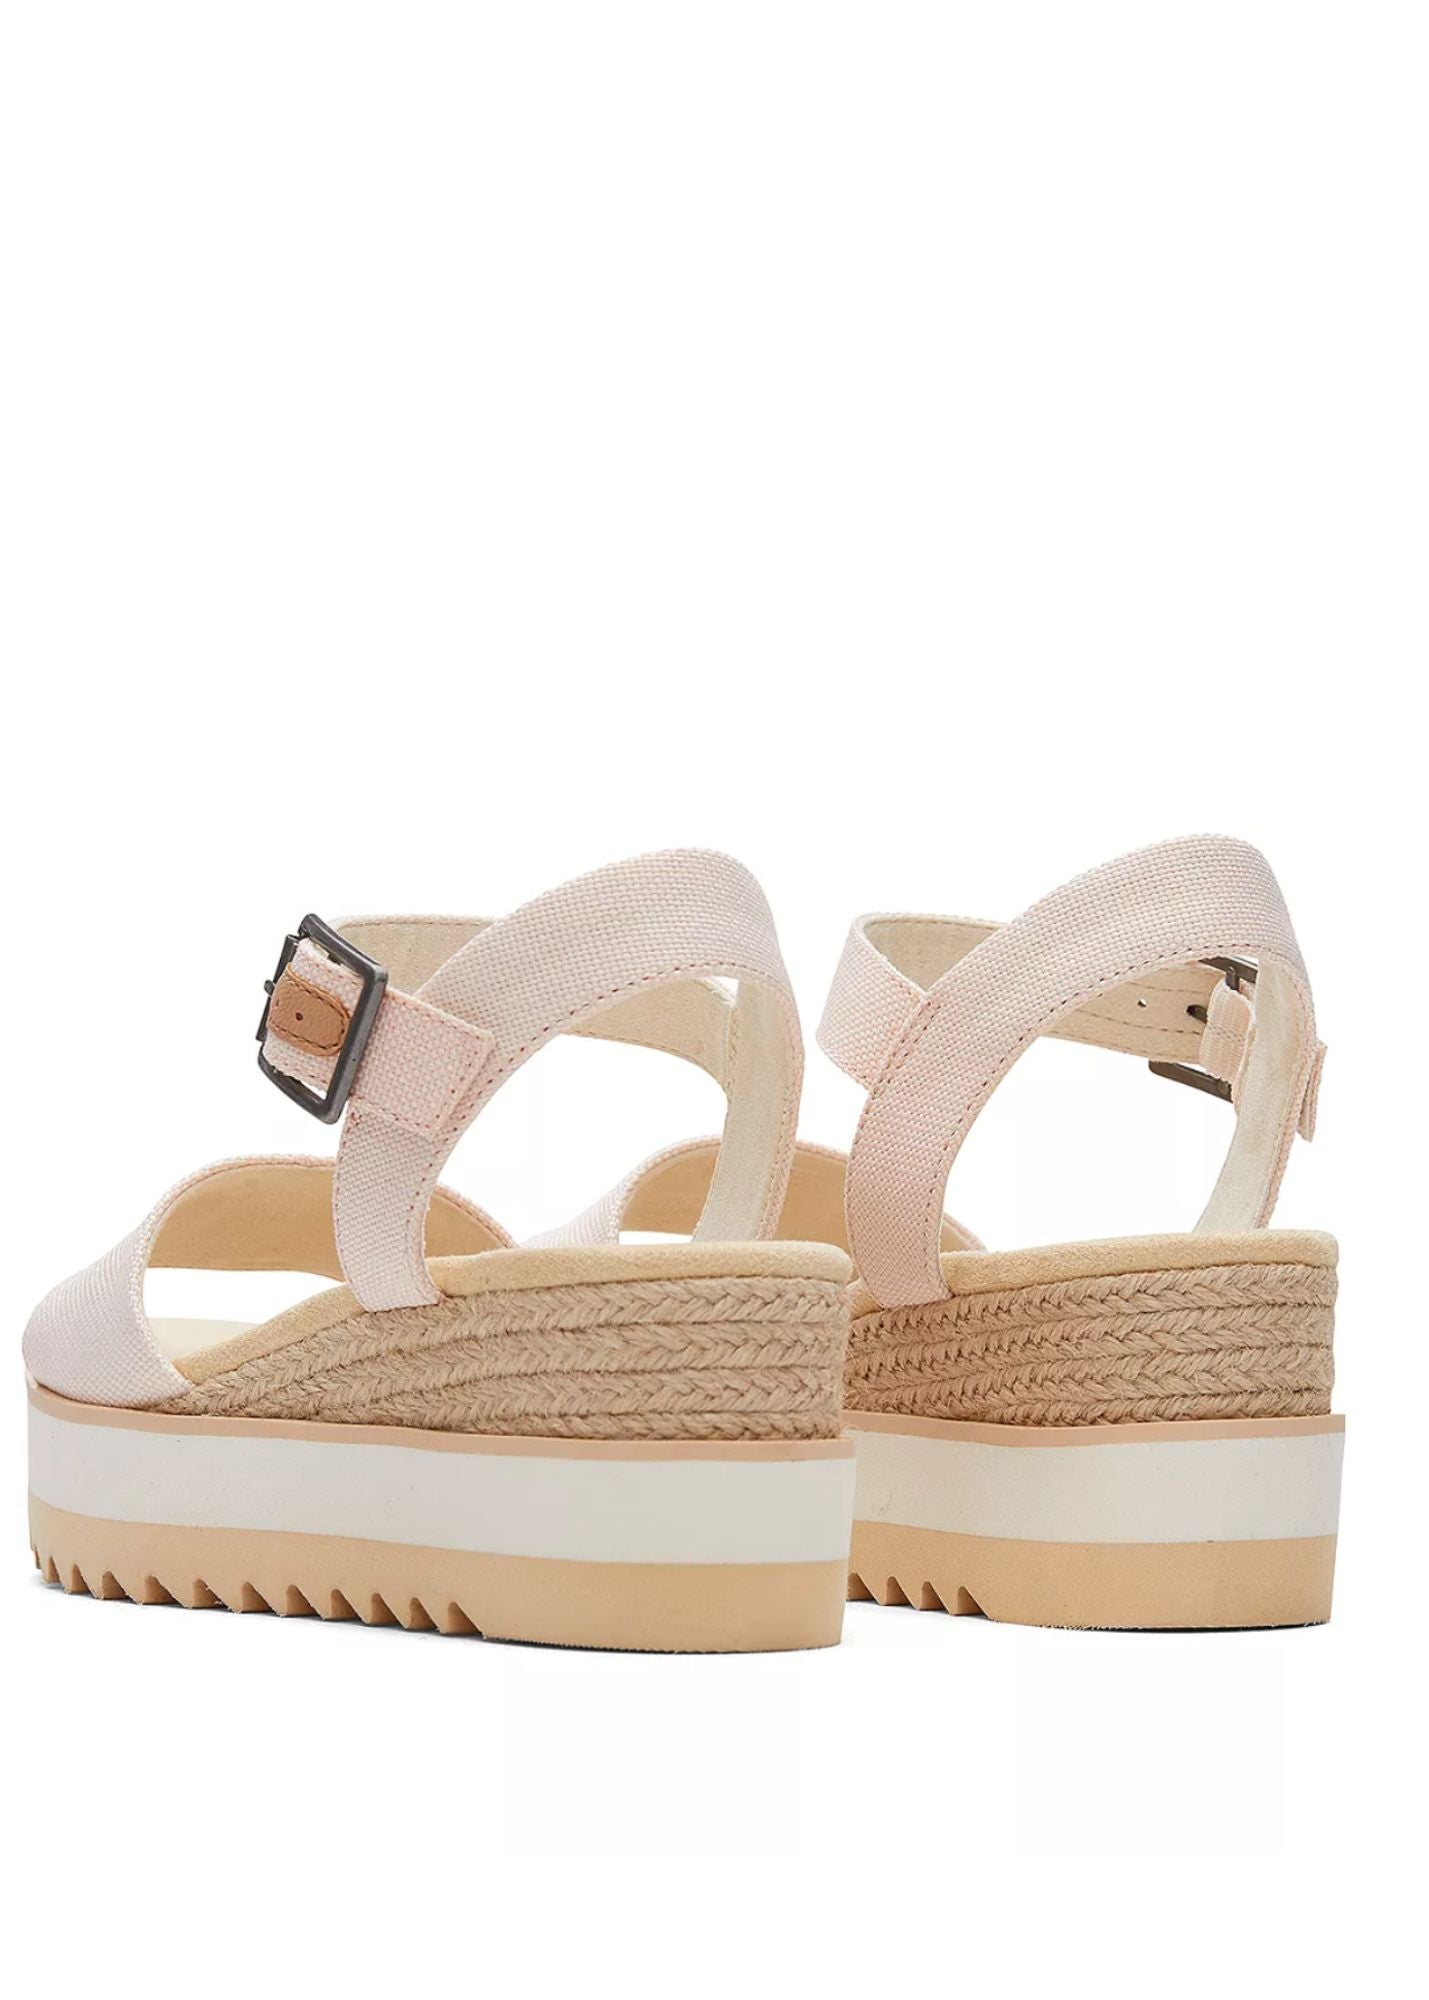 TOMS® Diana Pink Wedge Sandal - FINAL SALE Shoes